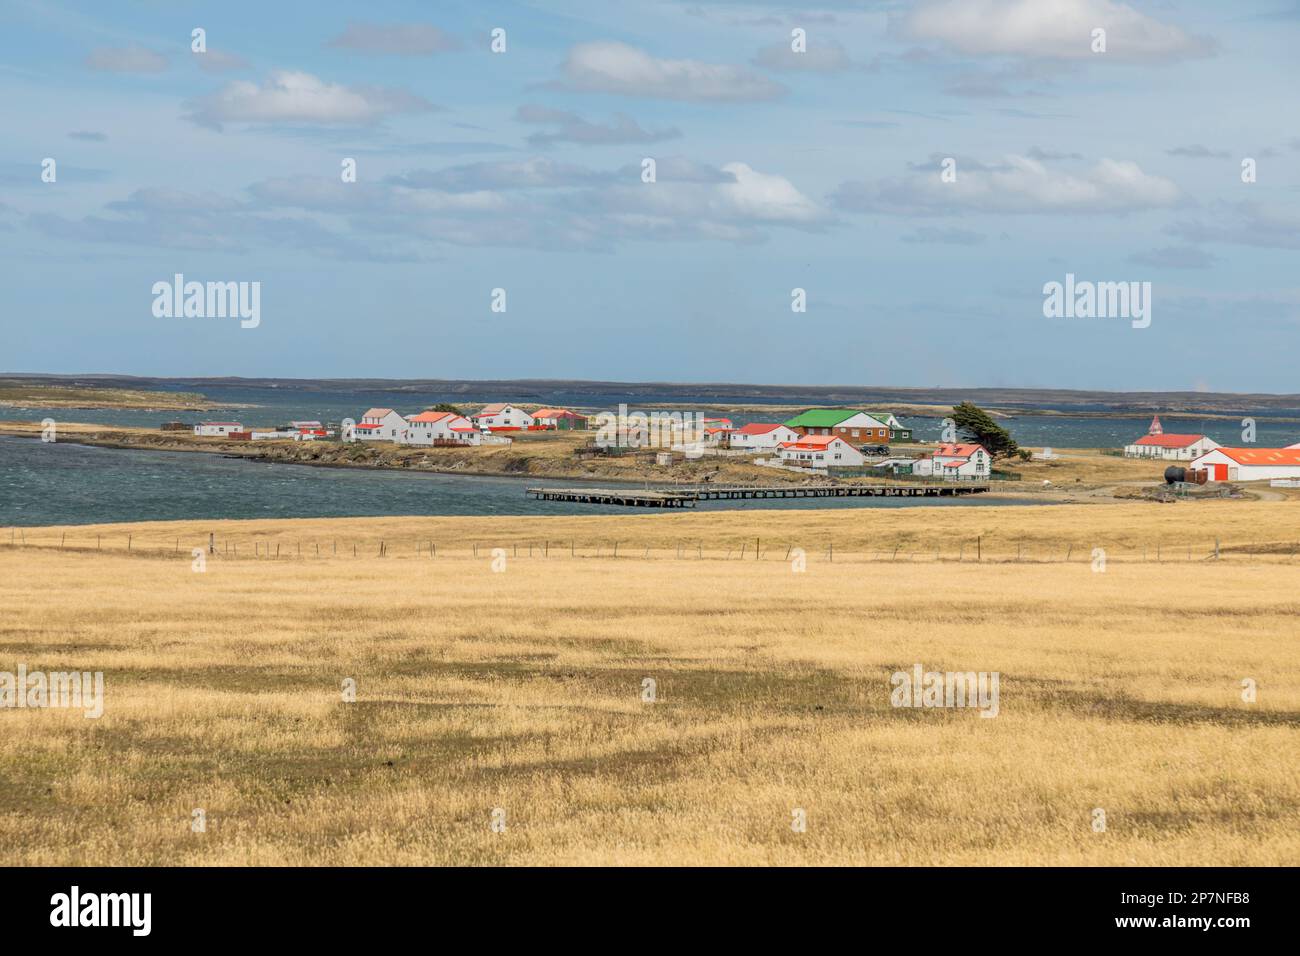 The small settlement at Goose Green in the Falkland Islands. Scene of battles during the 1982 Falklands War. Stock Photo